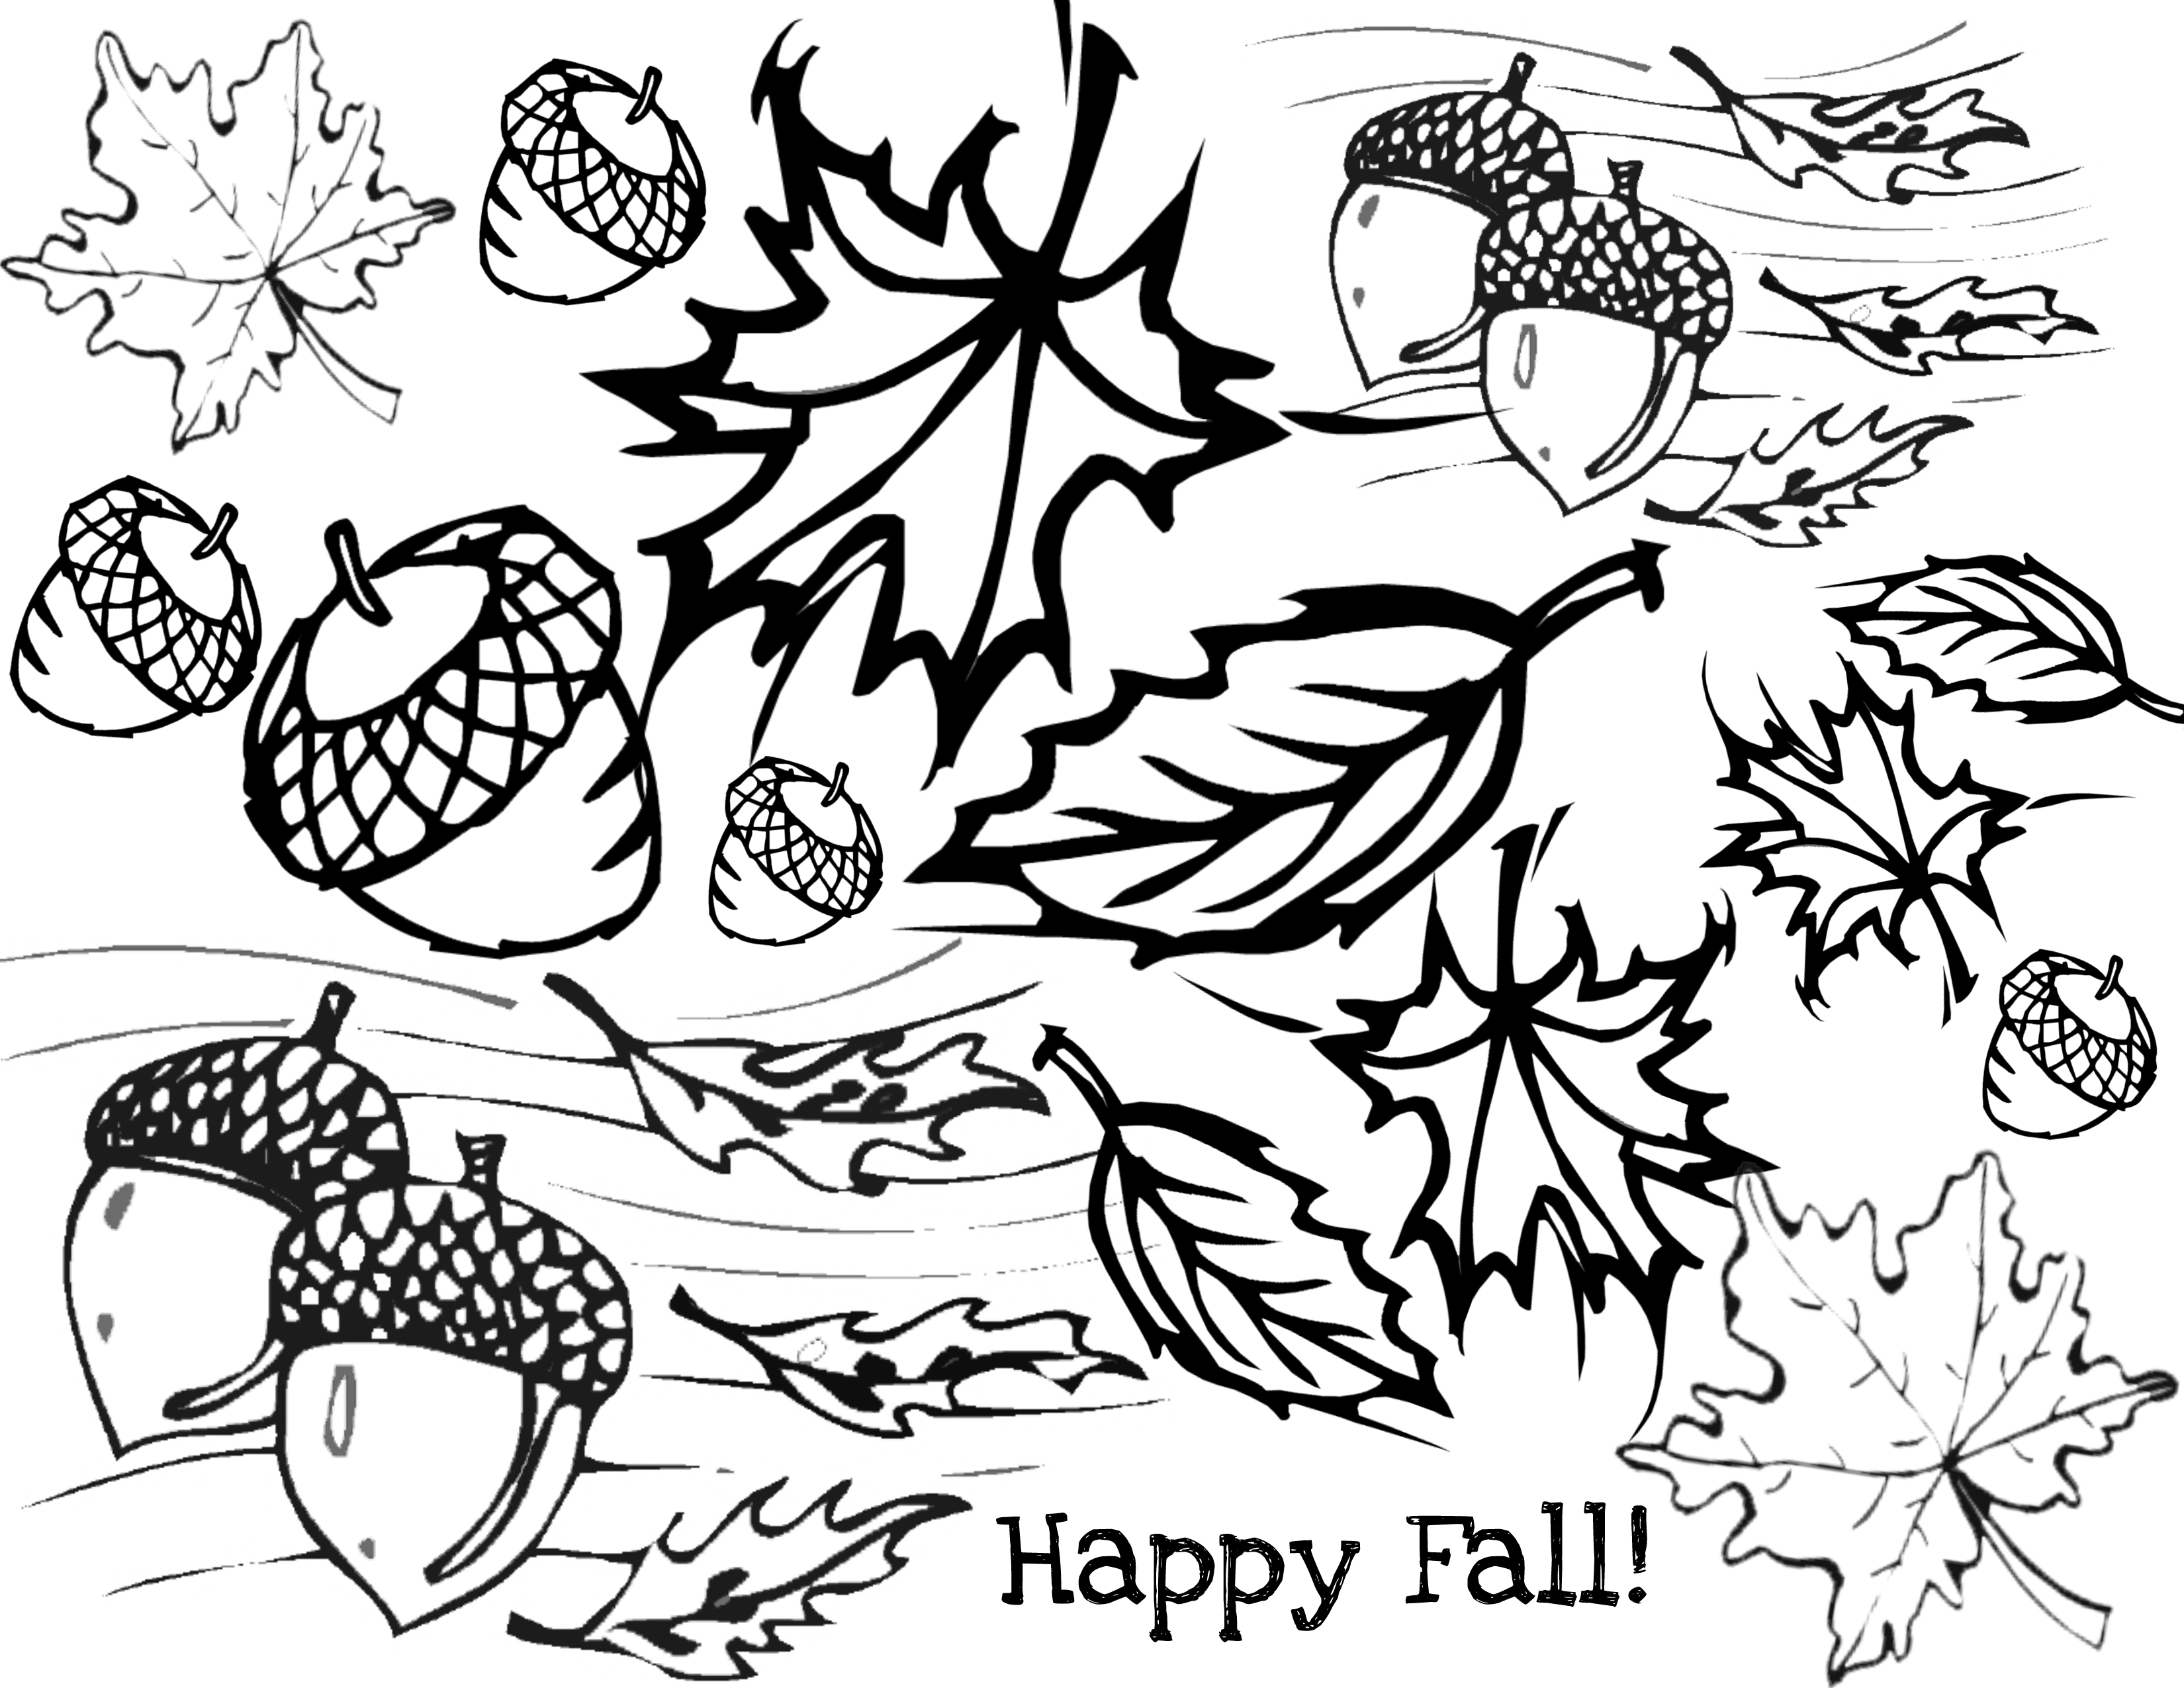 Fall Coloring Pages For Adults Printable at GetColorings.com | Free